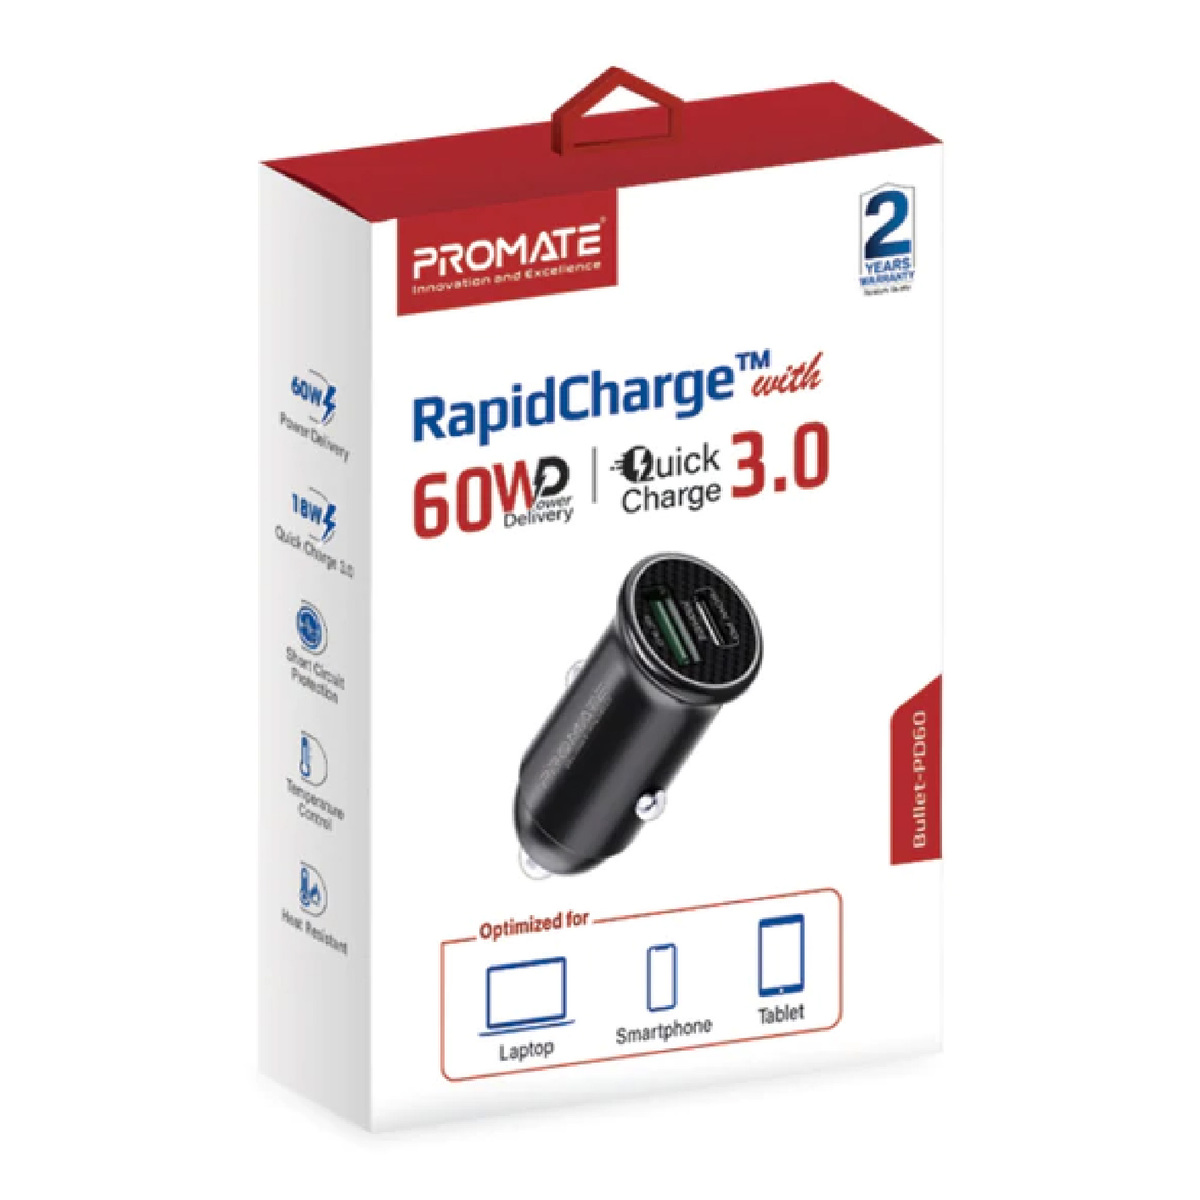 Promate RapidCharge Mini Car Charger with 60W Power Delivery & Quick Charge 3.0 Bullet-PD60